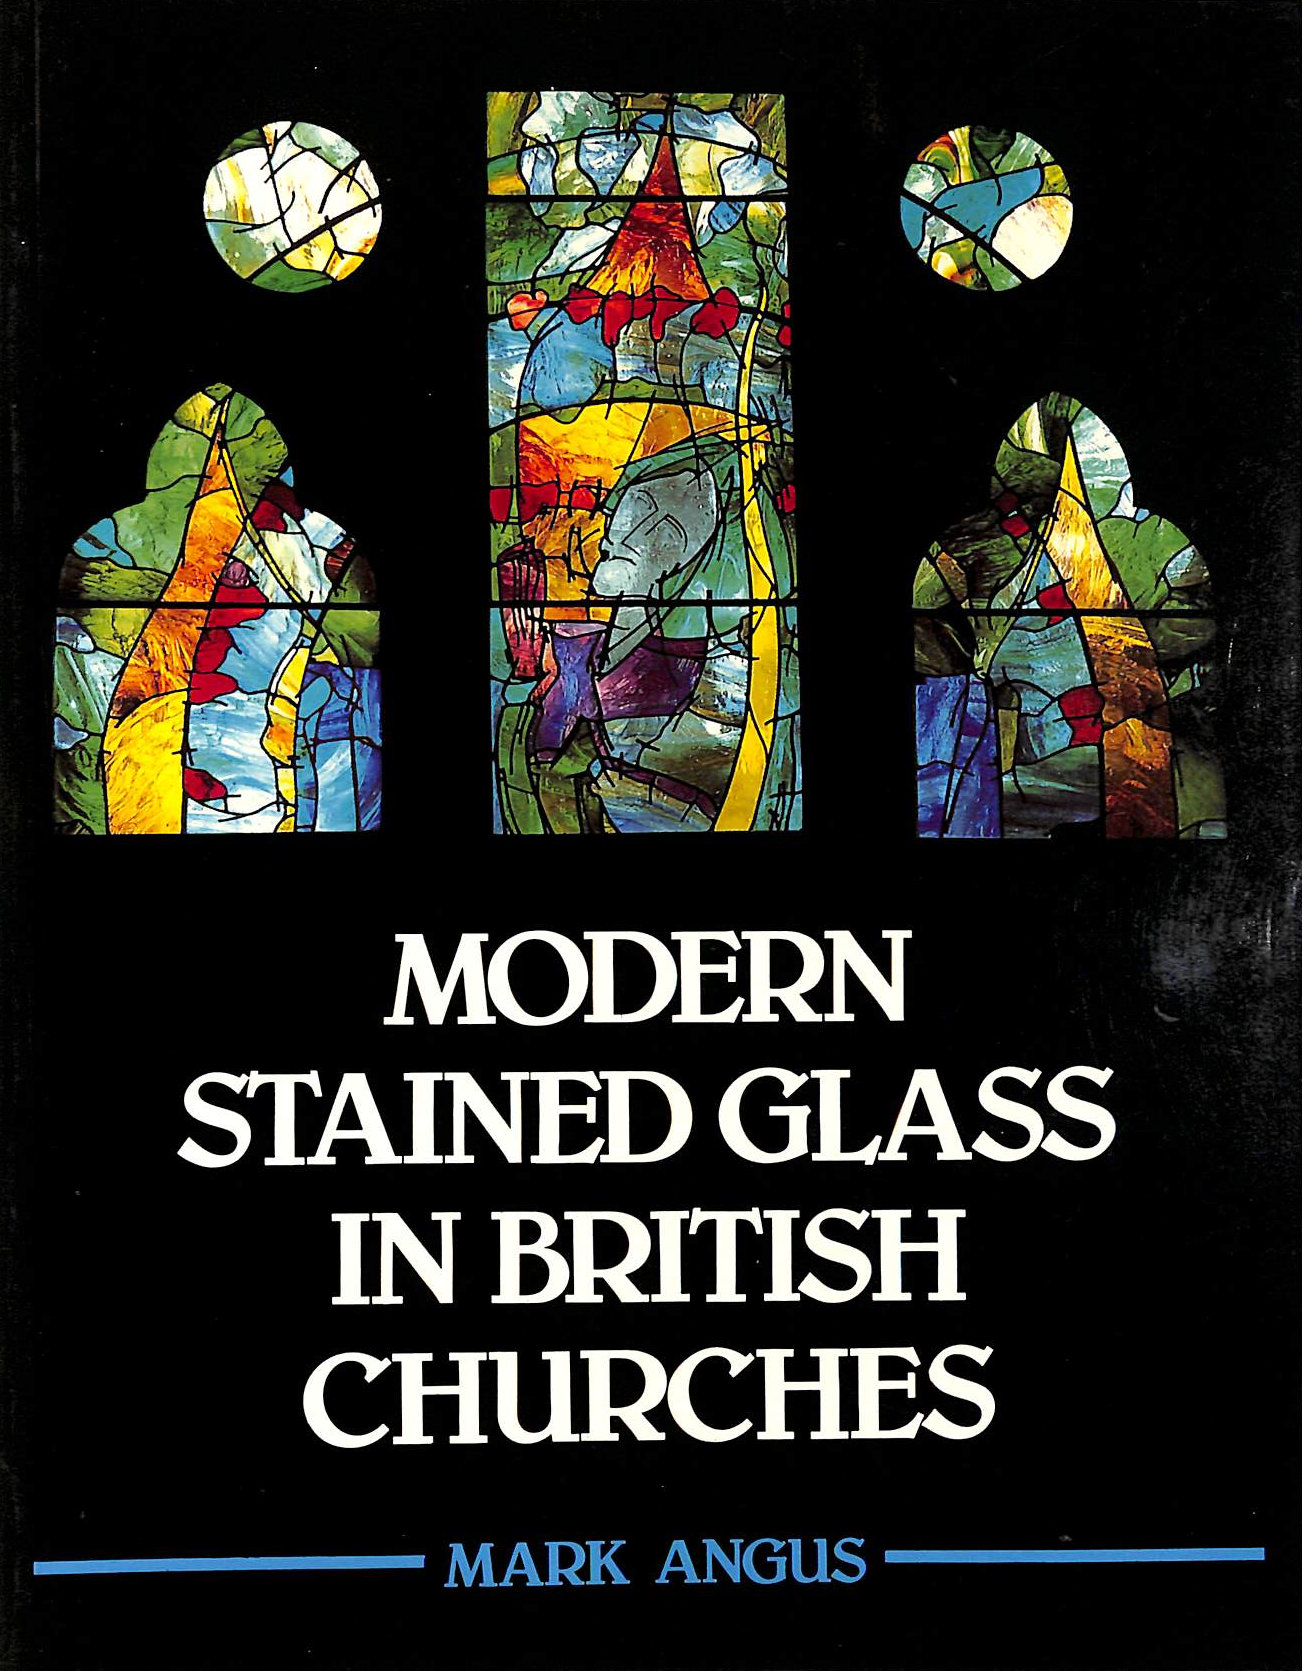 M ANGUS - Modern Stained Glass in British Churches